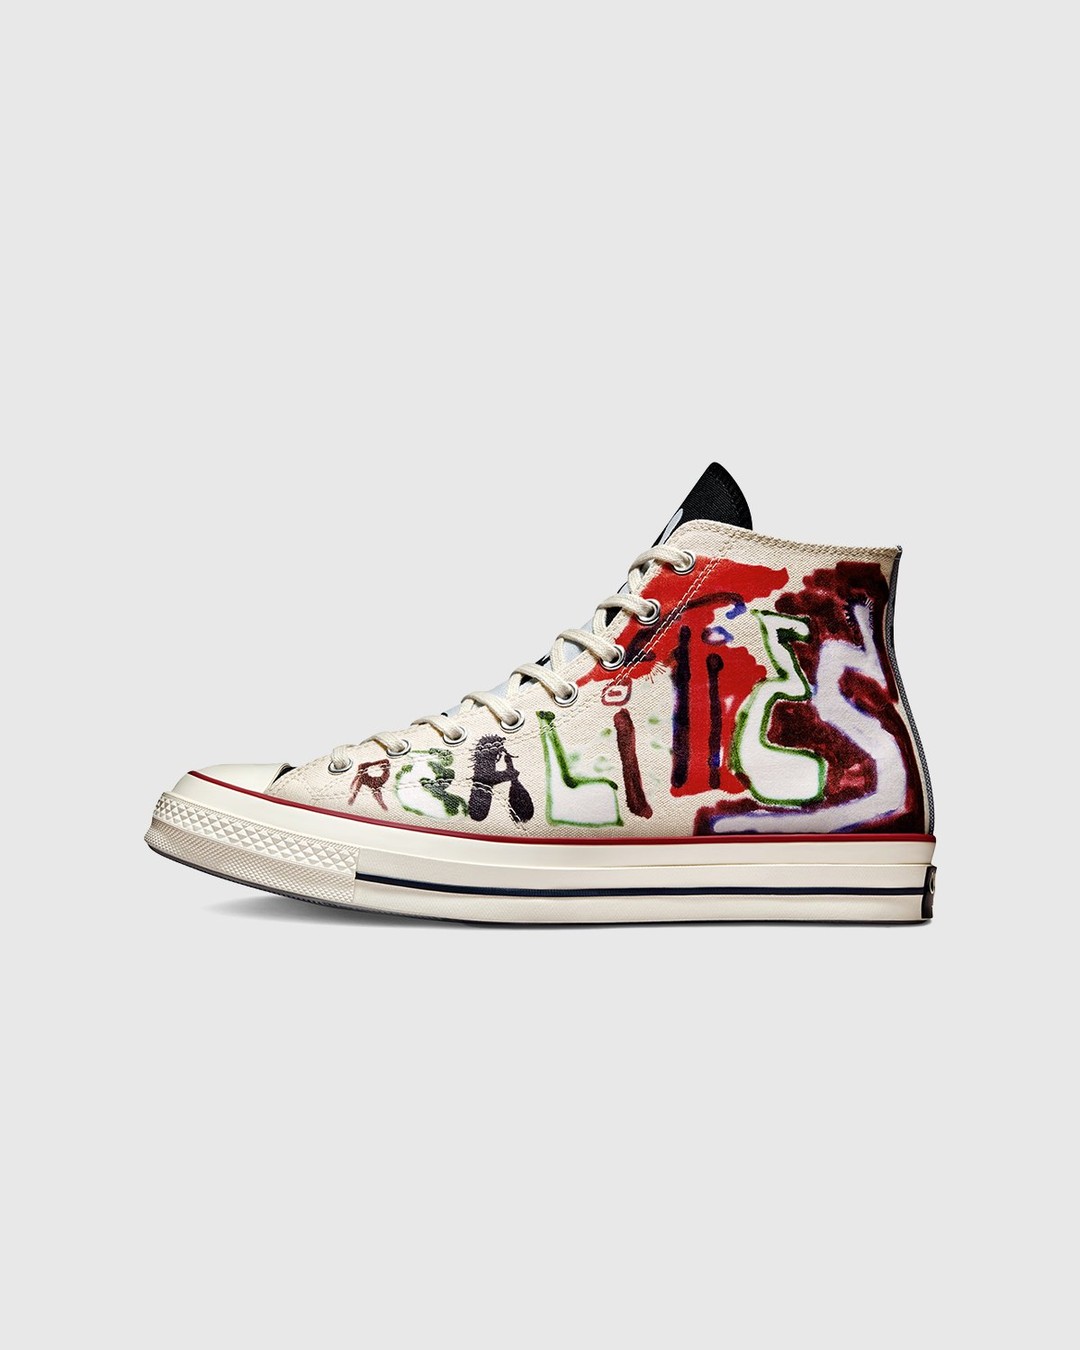 Converse x Come Tees – Chuck 70 Hi White/Multi/Egret - High Top Sneakers - Red - Image 2